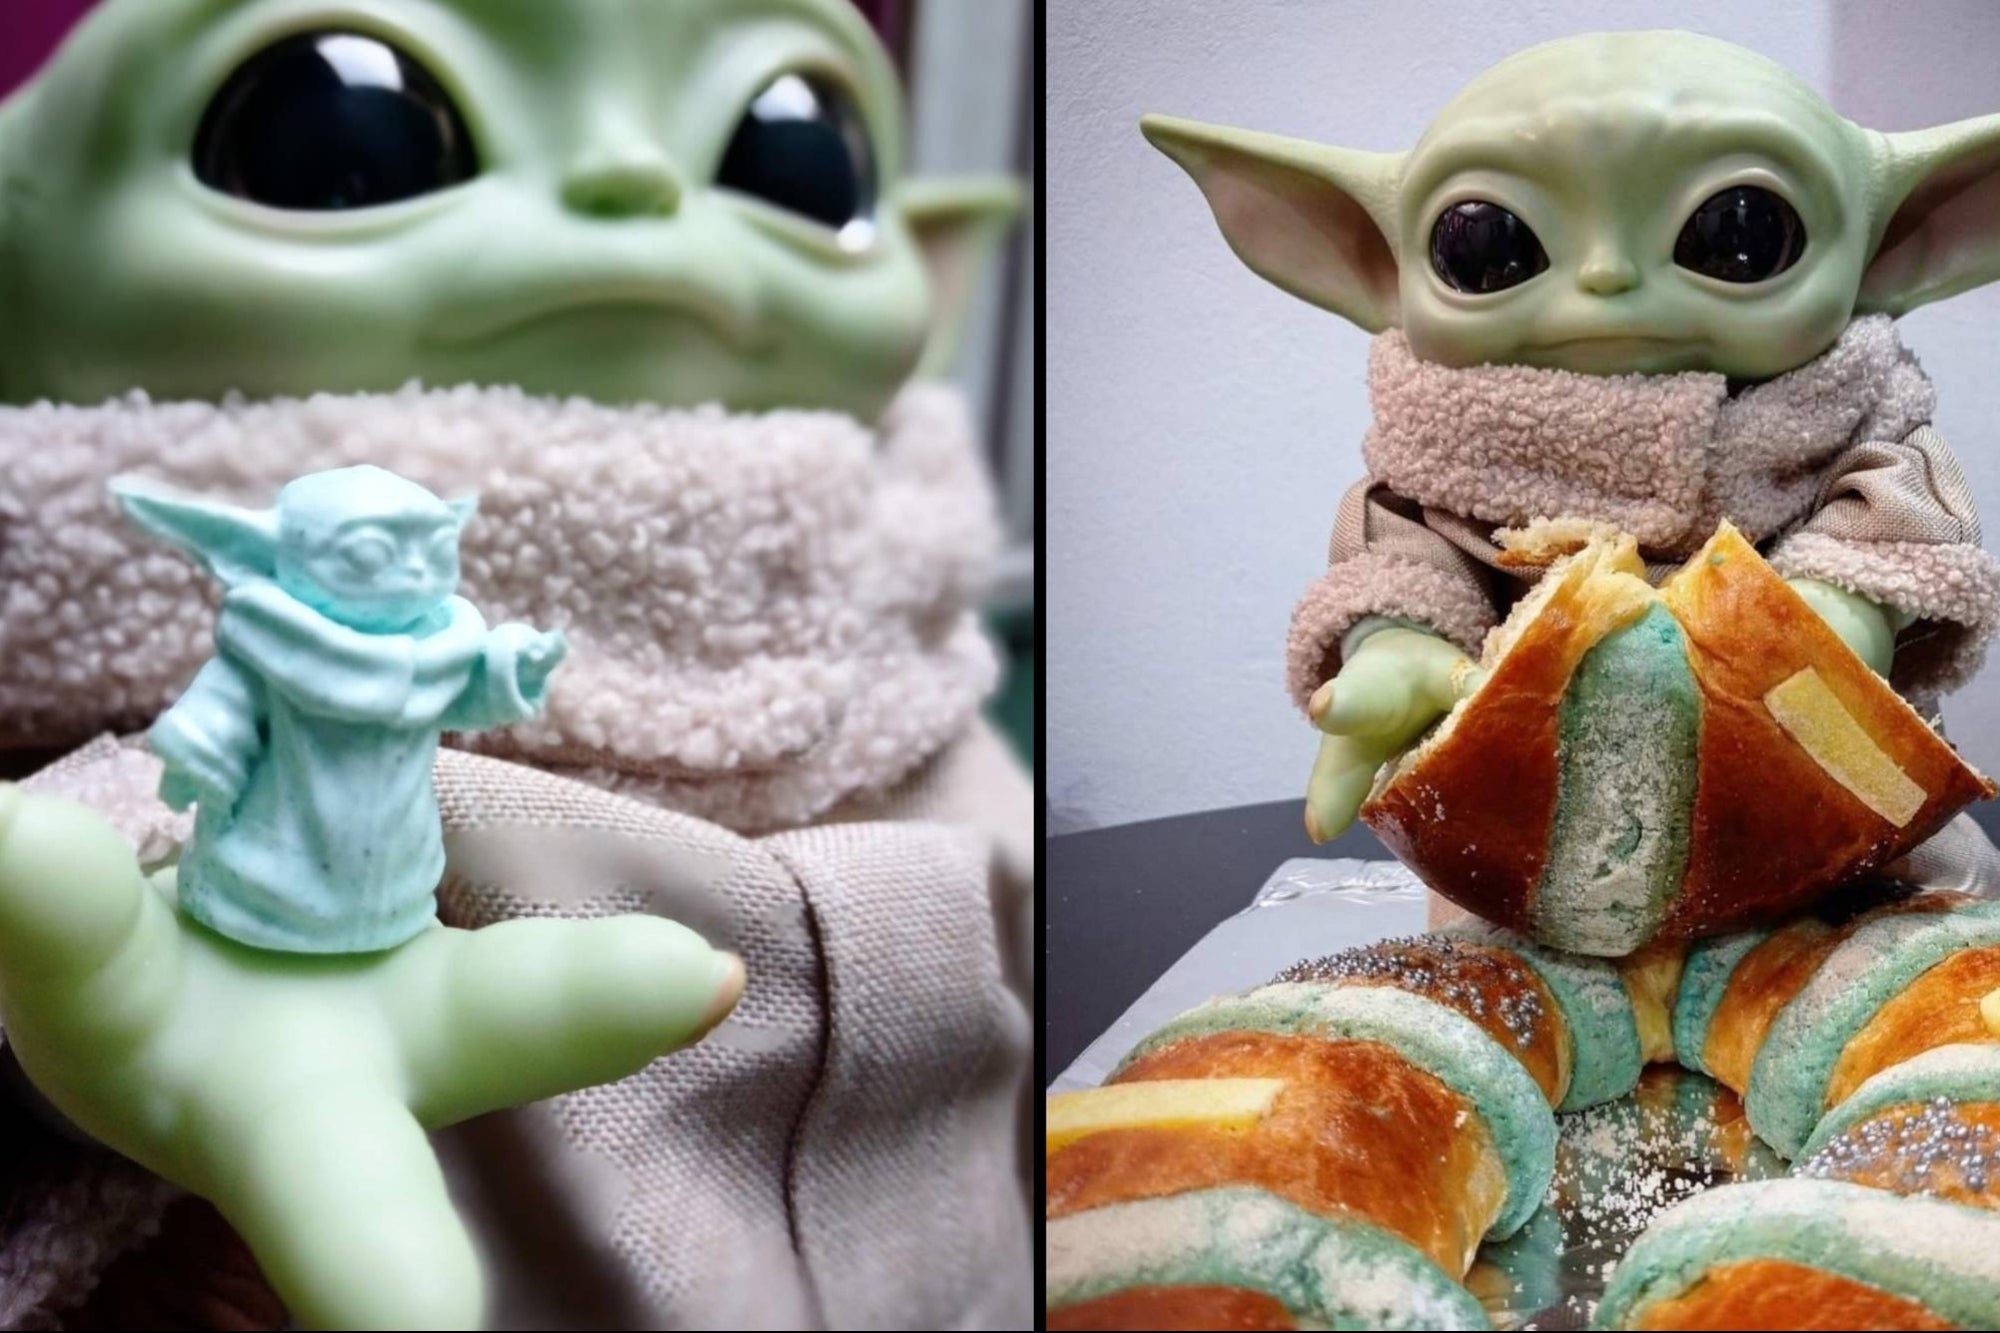 Baby Yoda Bread You Can Order at Home